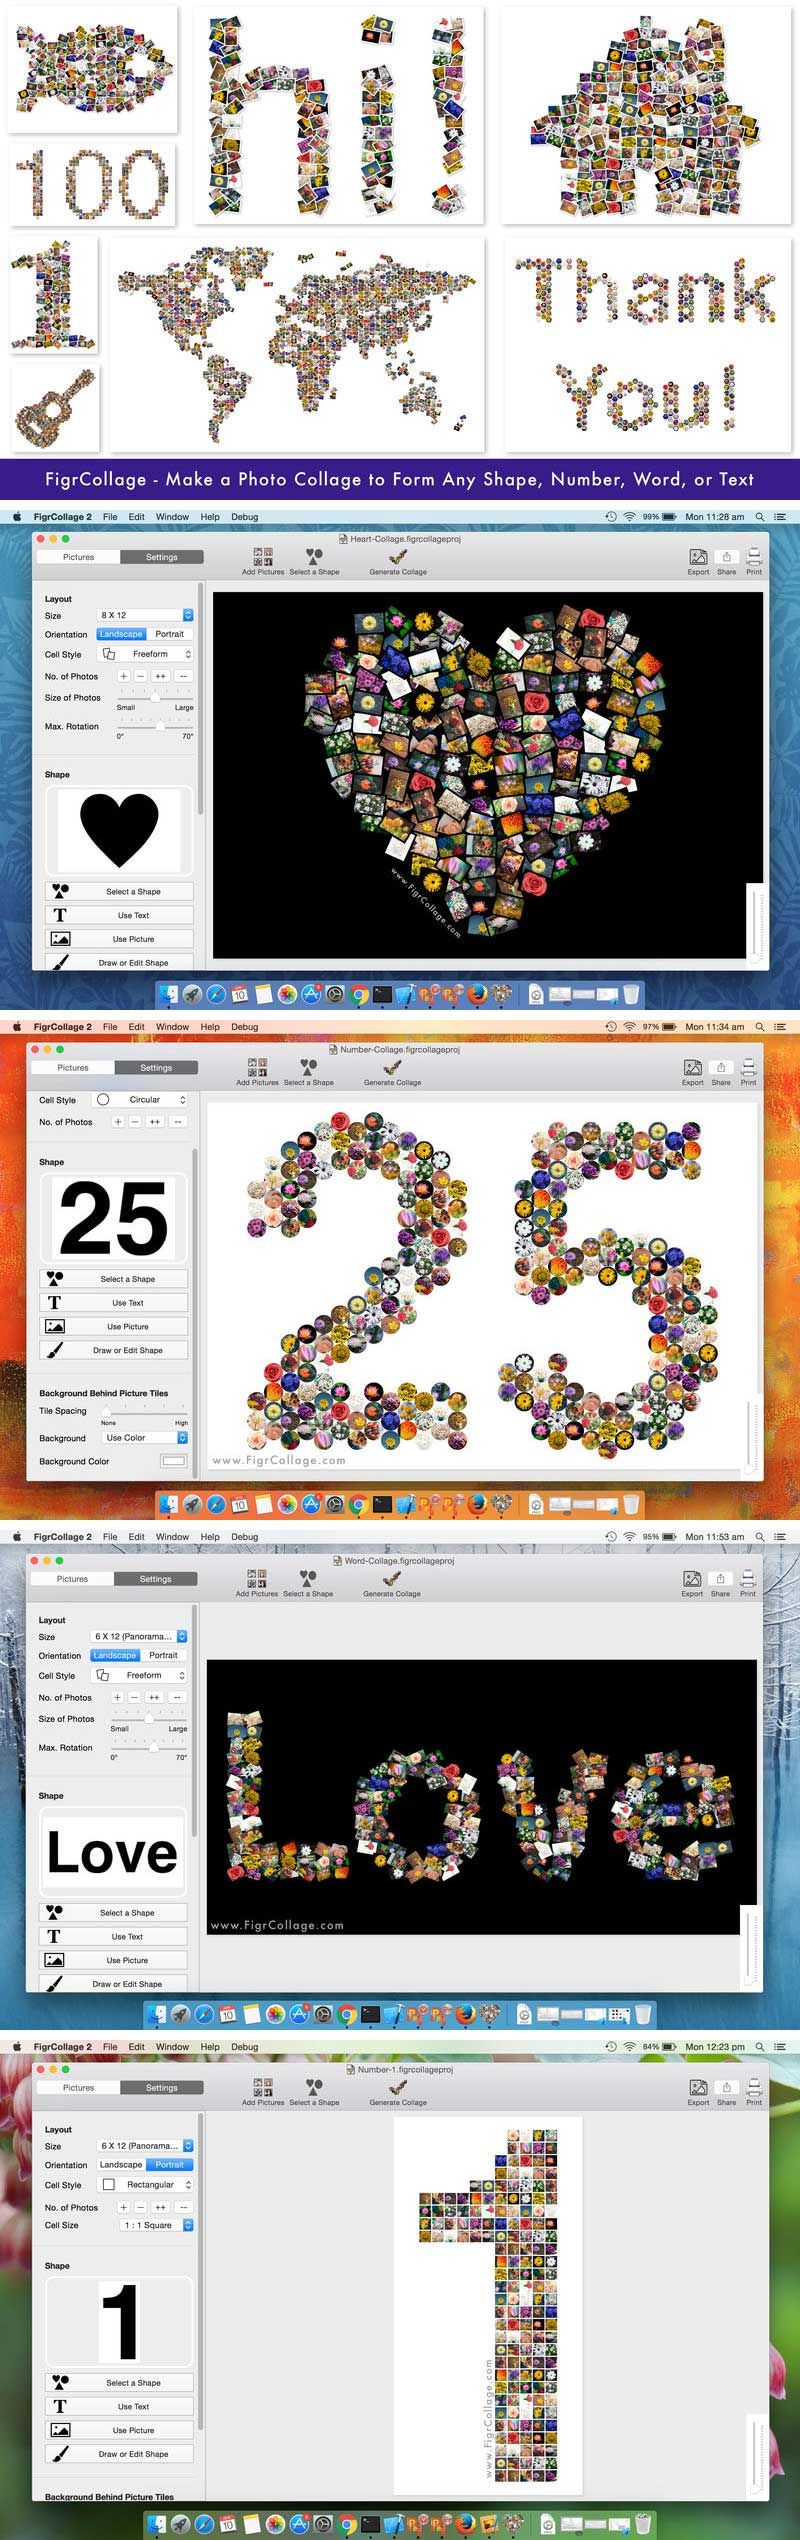 FigrCollage 2.5 for Mac Free Download